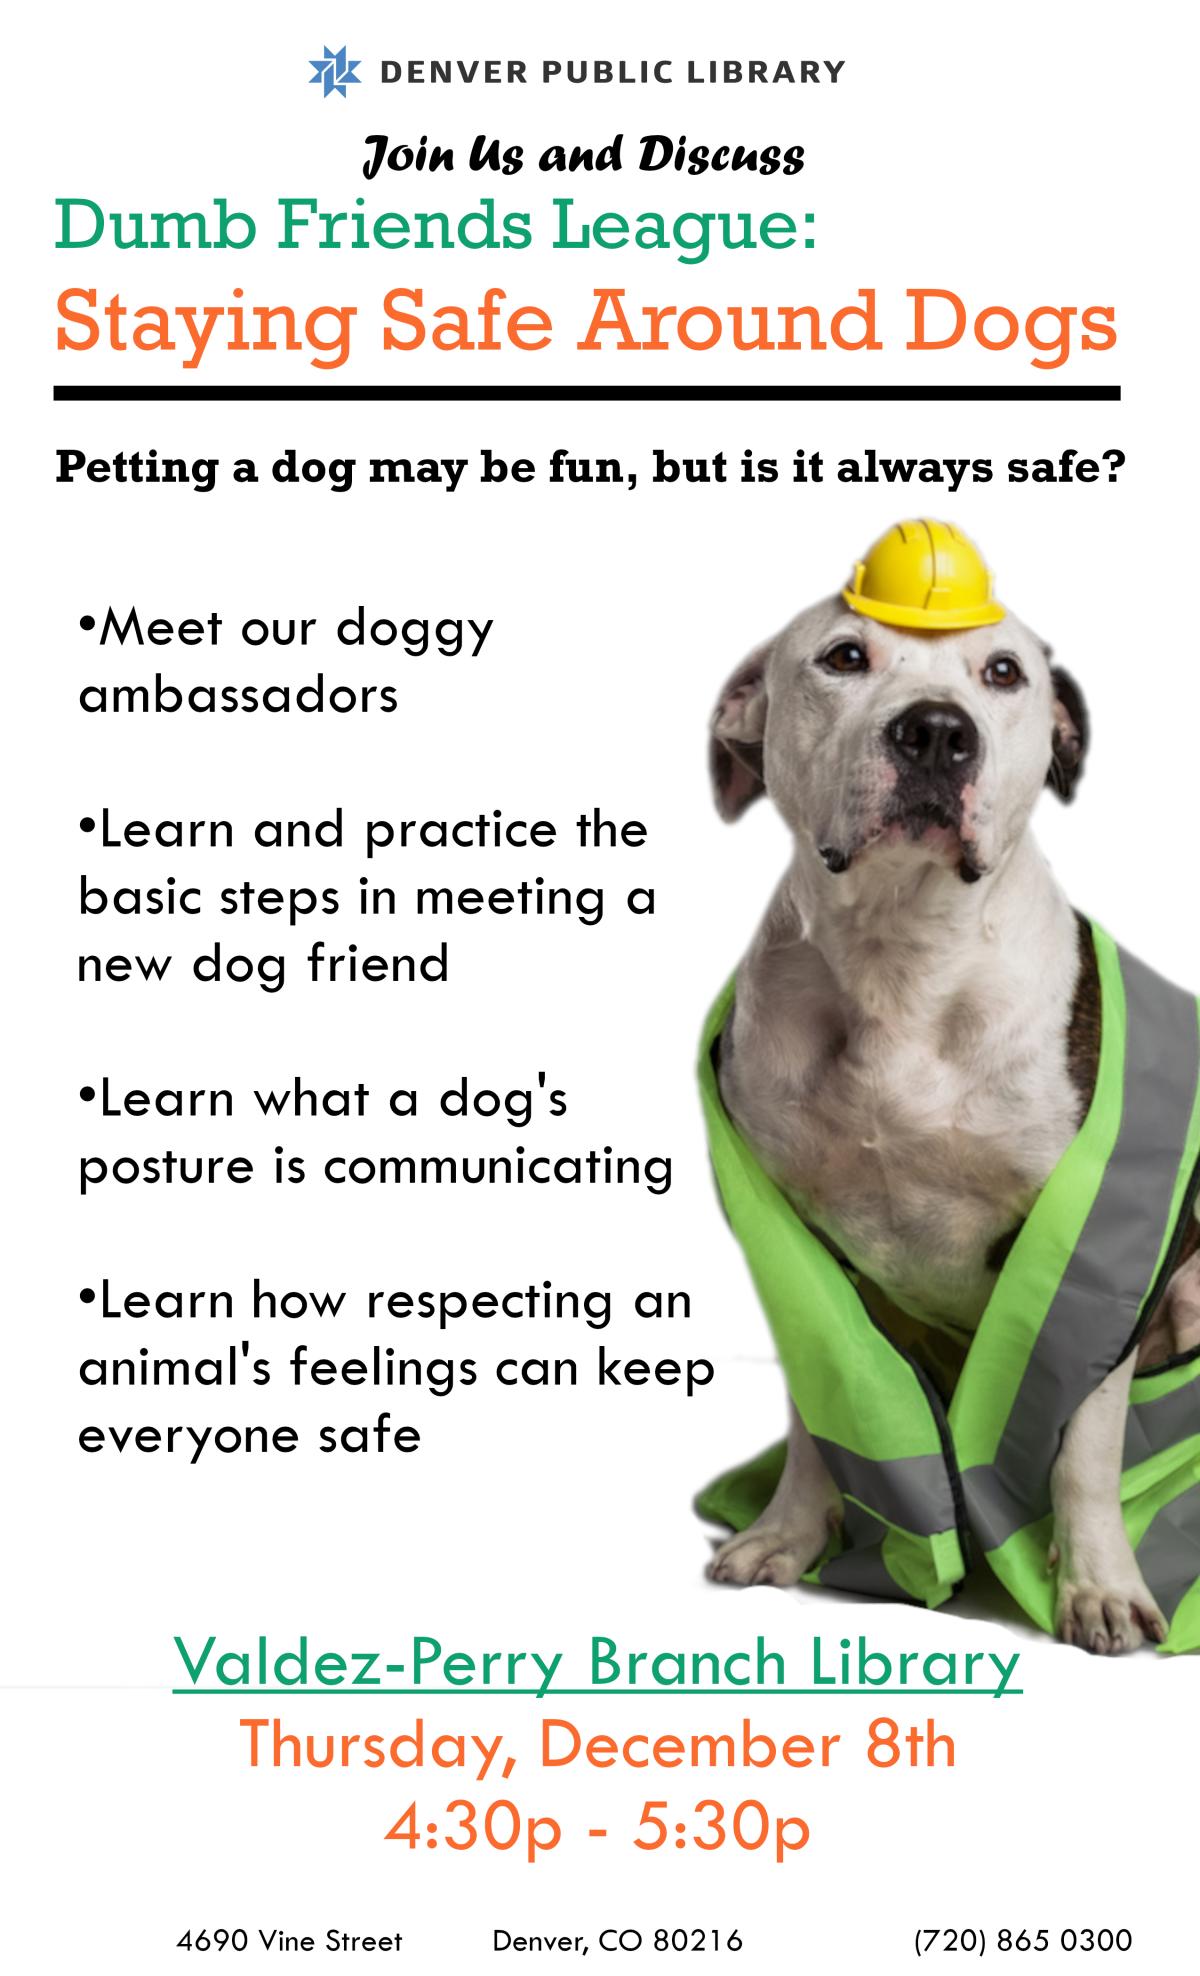 picture of dog in safety vest and hard hat